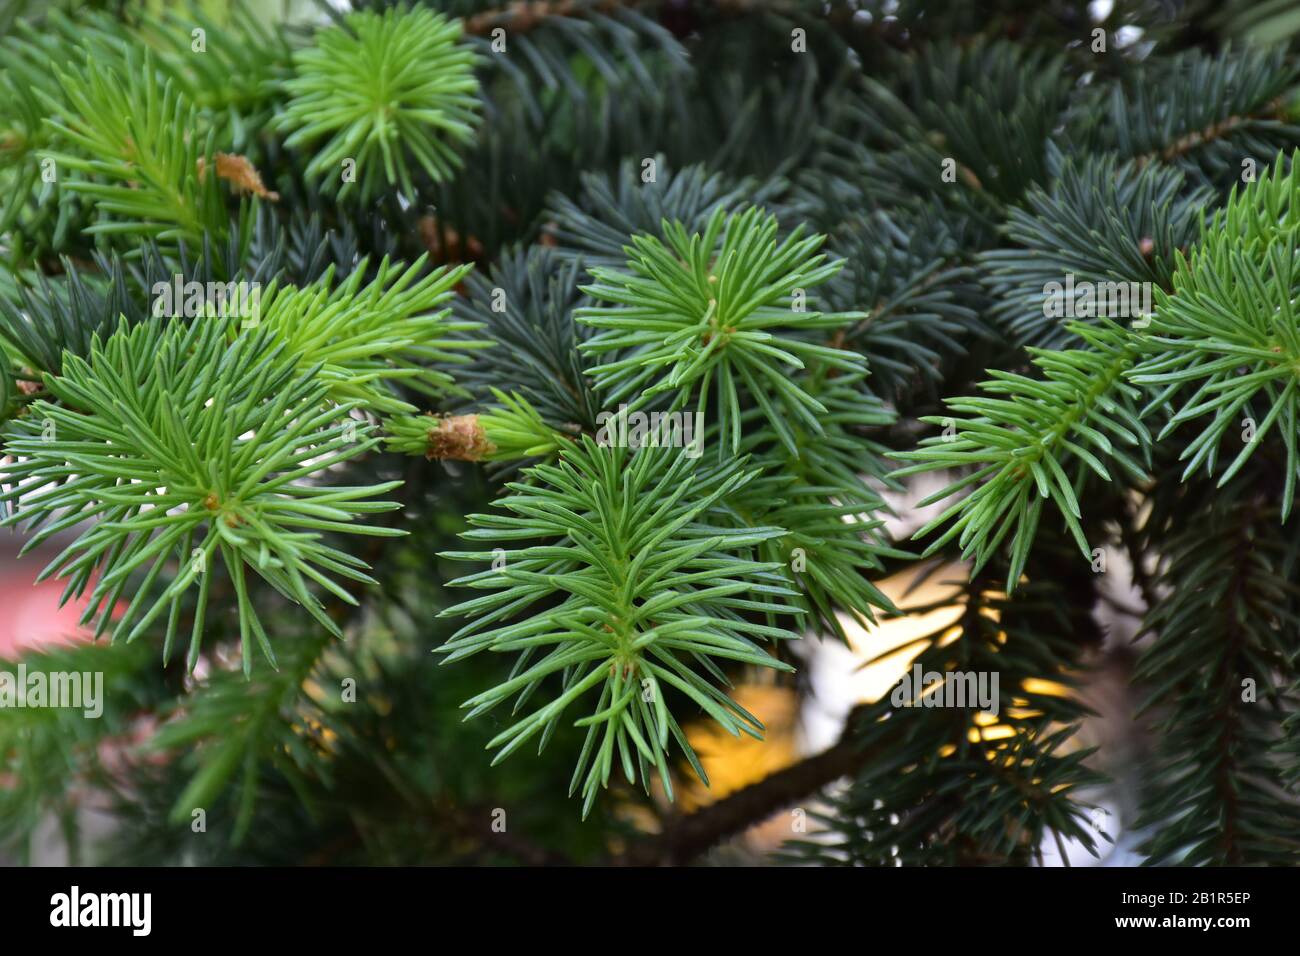 Green twigs of fir tree with short needles Stock Photo